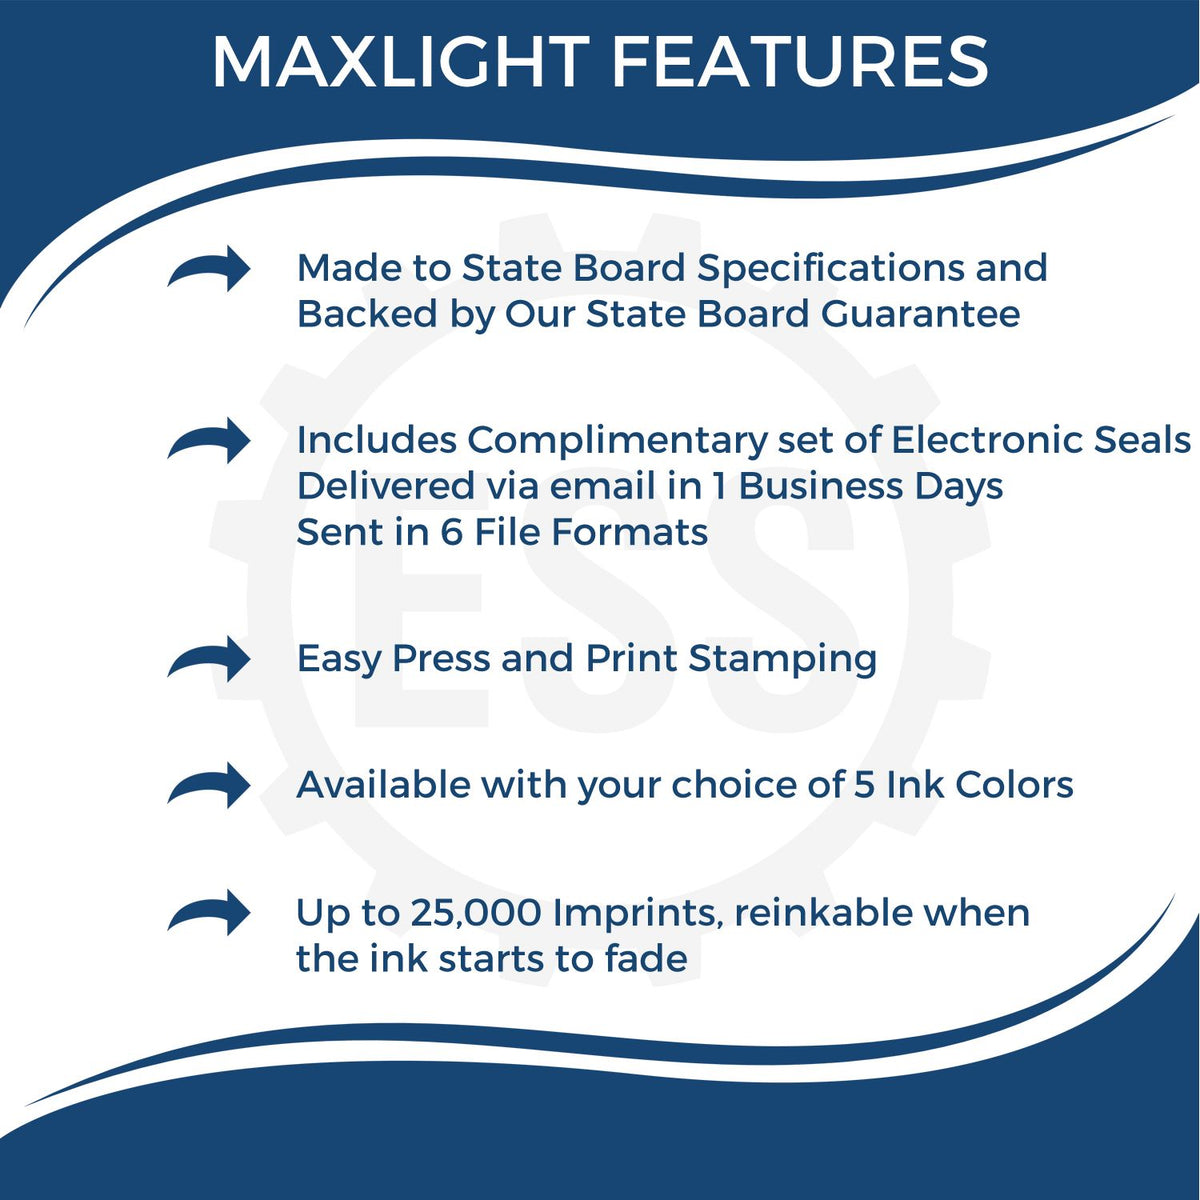 A picture of an infographic highlighting the selling points for the MaxLight Premium Pre-Inked Kentucky State Seal Notarial Stamp